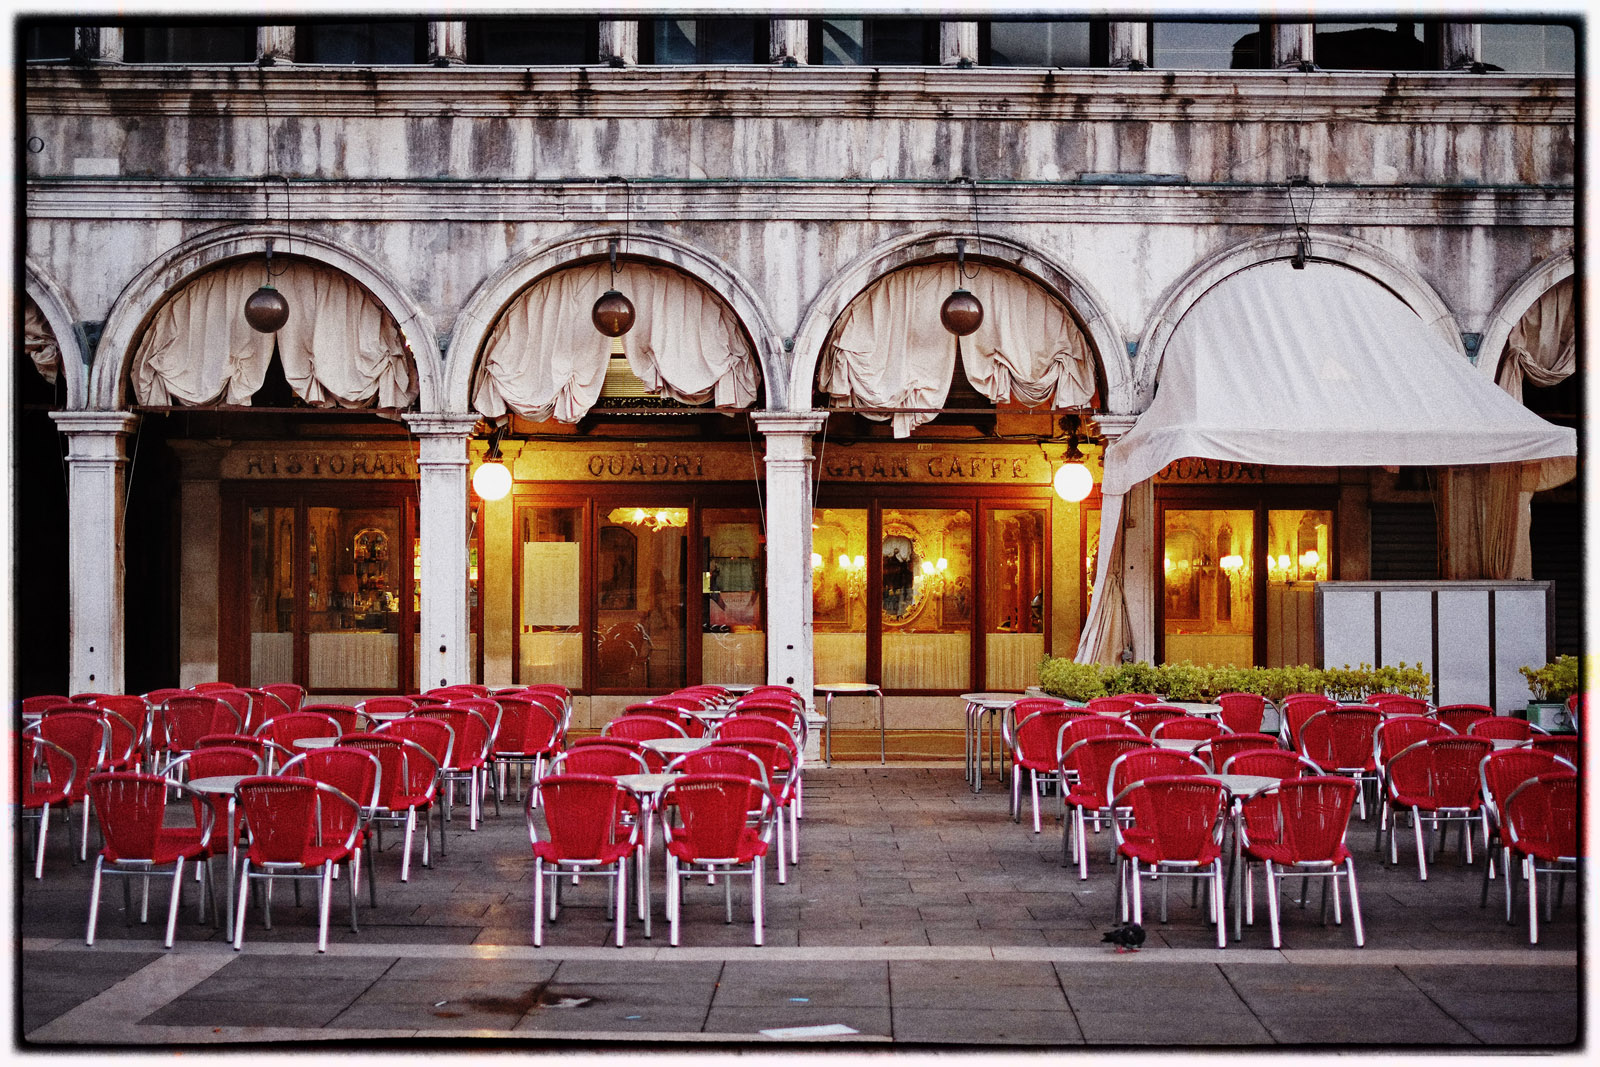 Early morning piazza San Marco, Tables and Chairs, Quadri Gran Caffe. Travel photography by Kent Johnson.